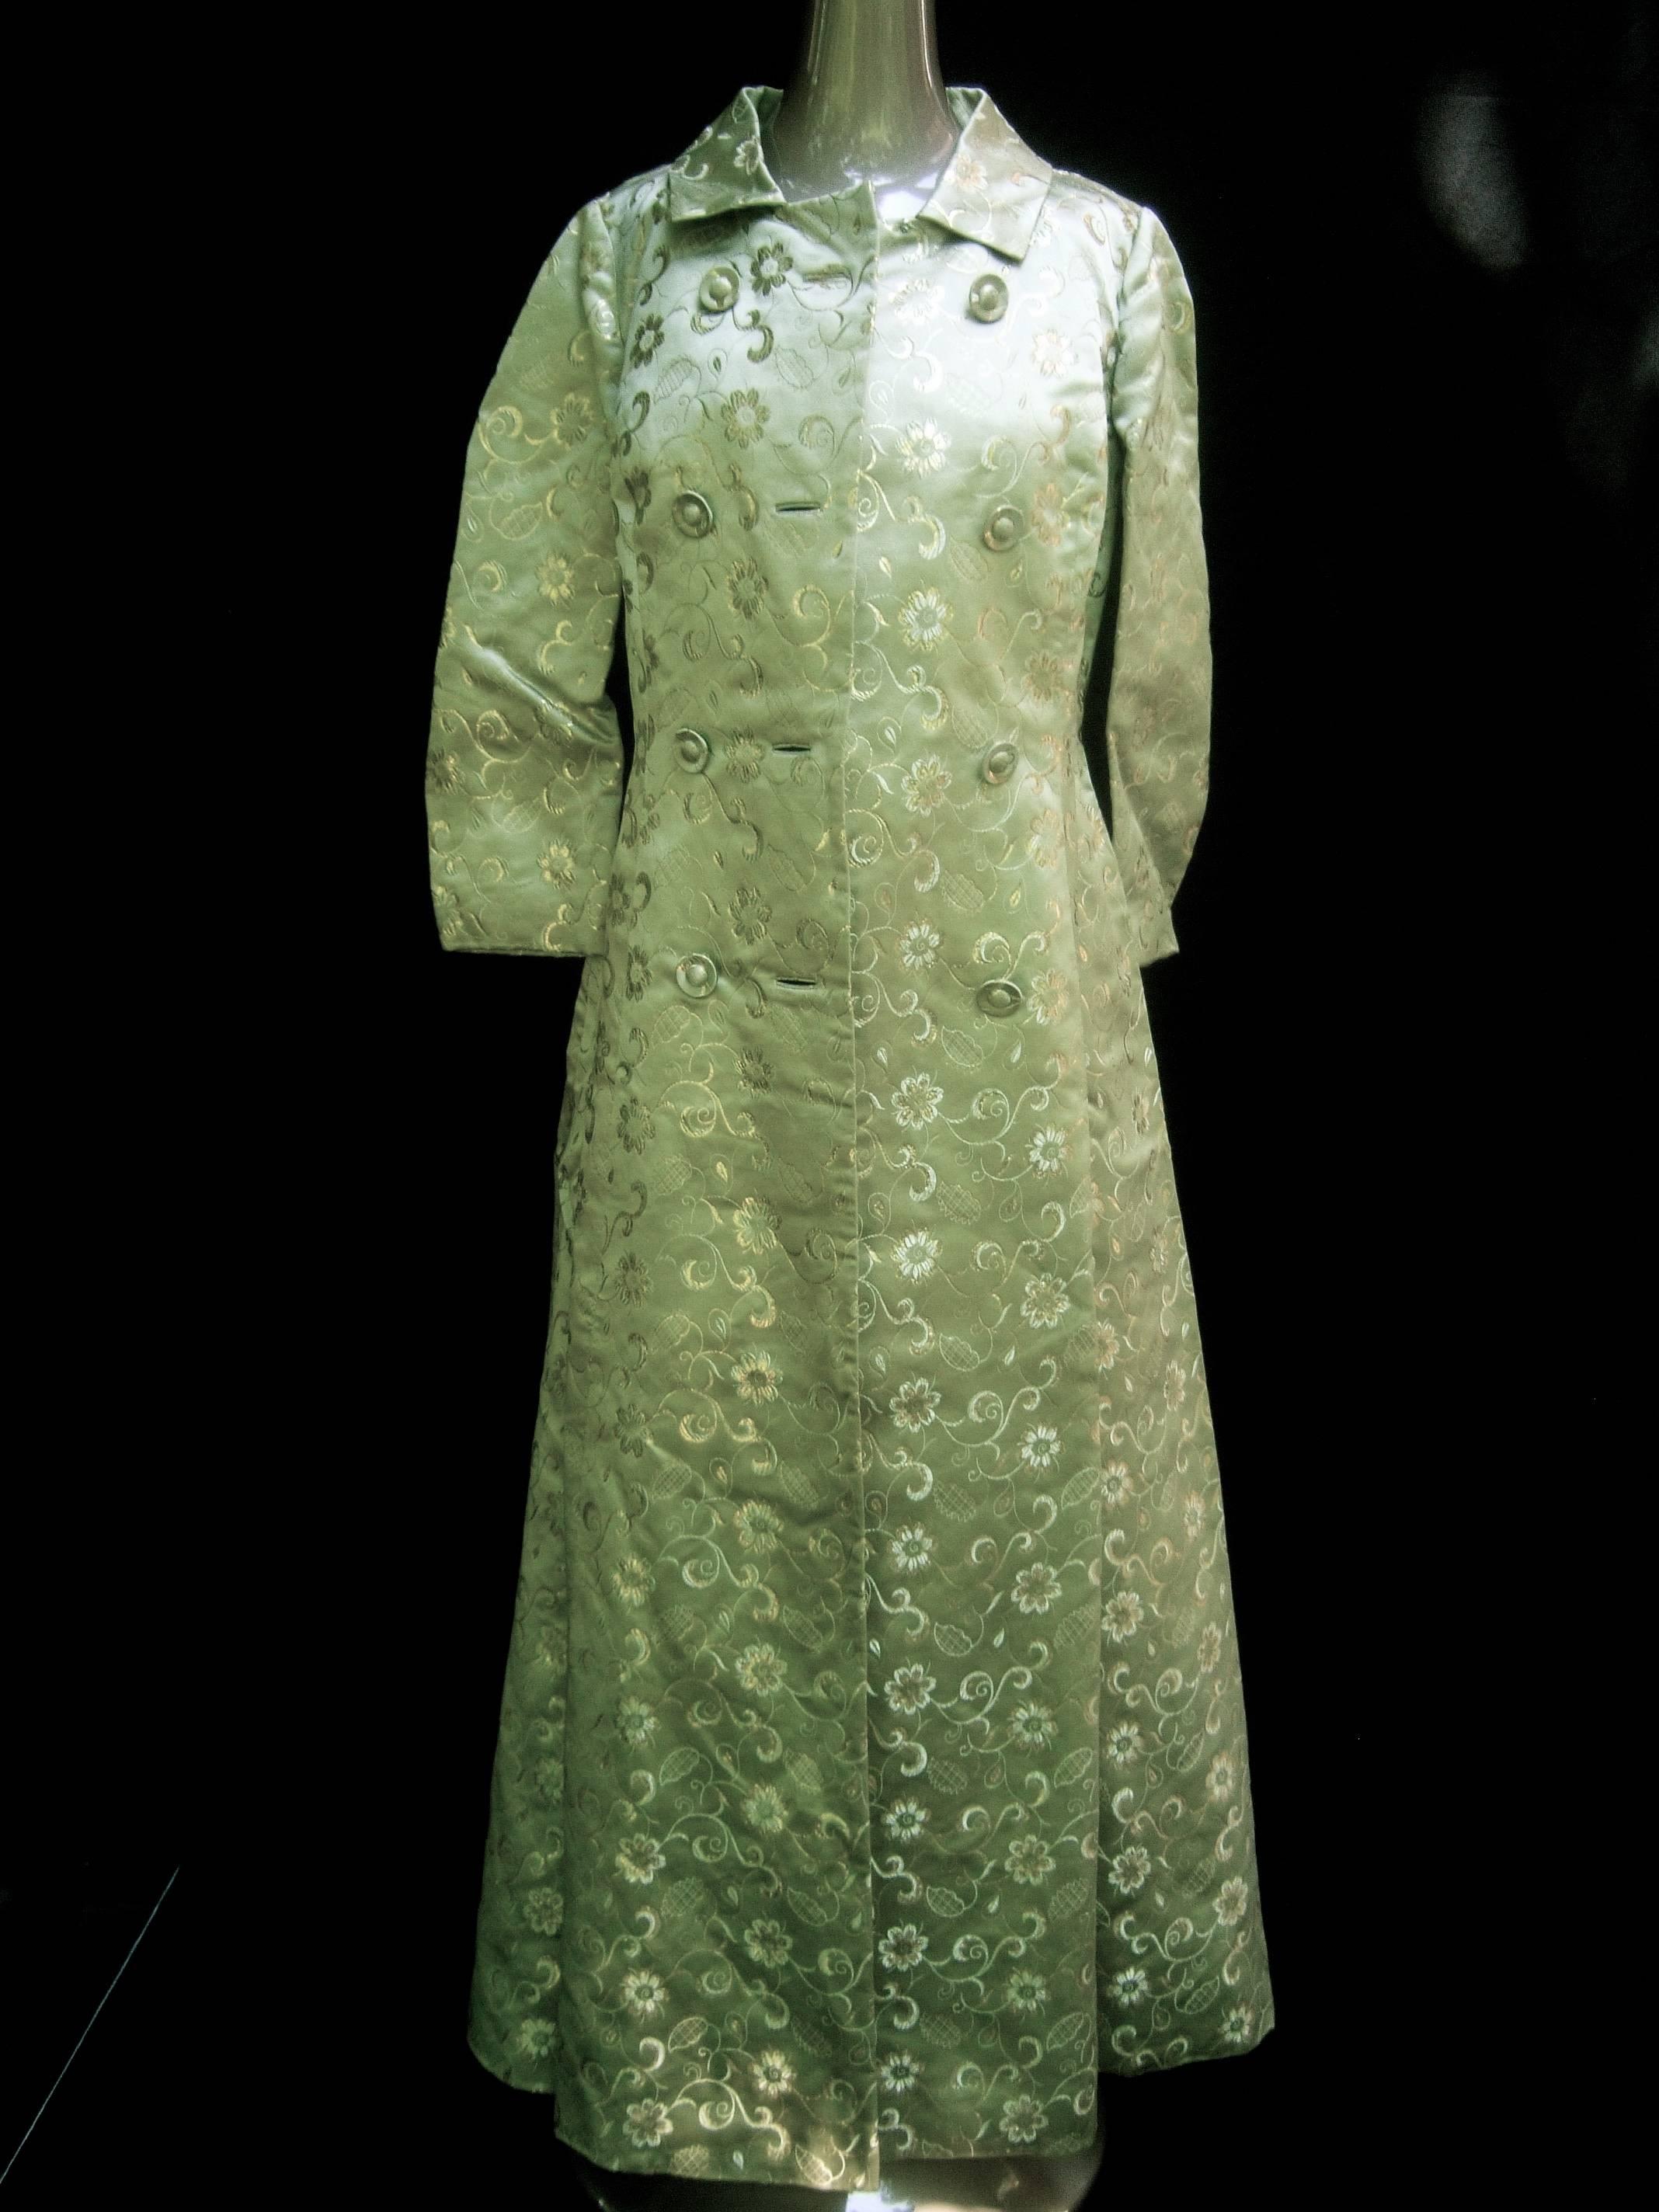 Opulent mint green satin brocade opera coat ensemble ca 1960s
The sweeping pale green brocade evening coat is designed
with luxurious satin brocade fabric with gold metallic floral
motifs. The exquisite fabric has an Asian style influence  

Paired